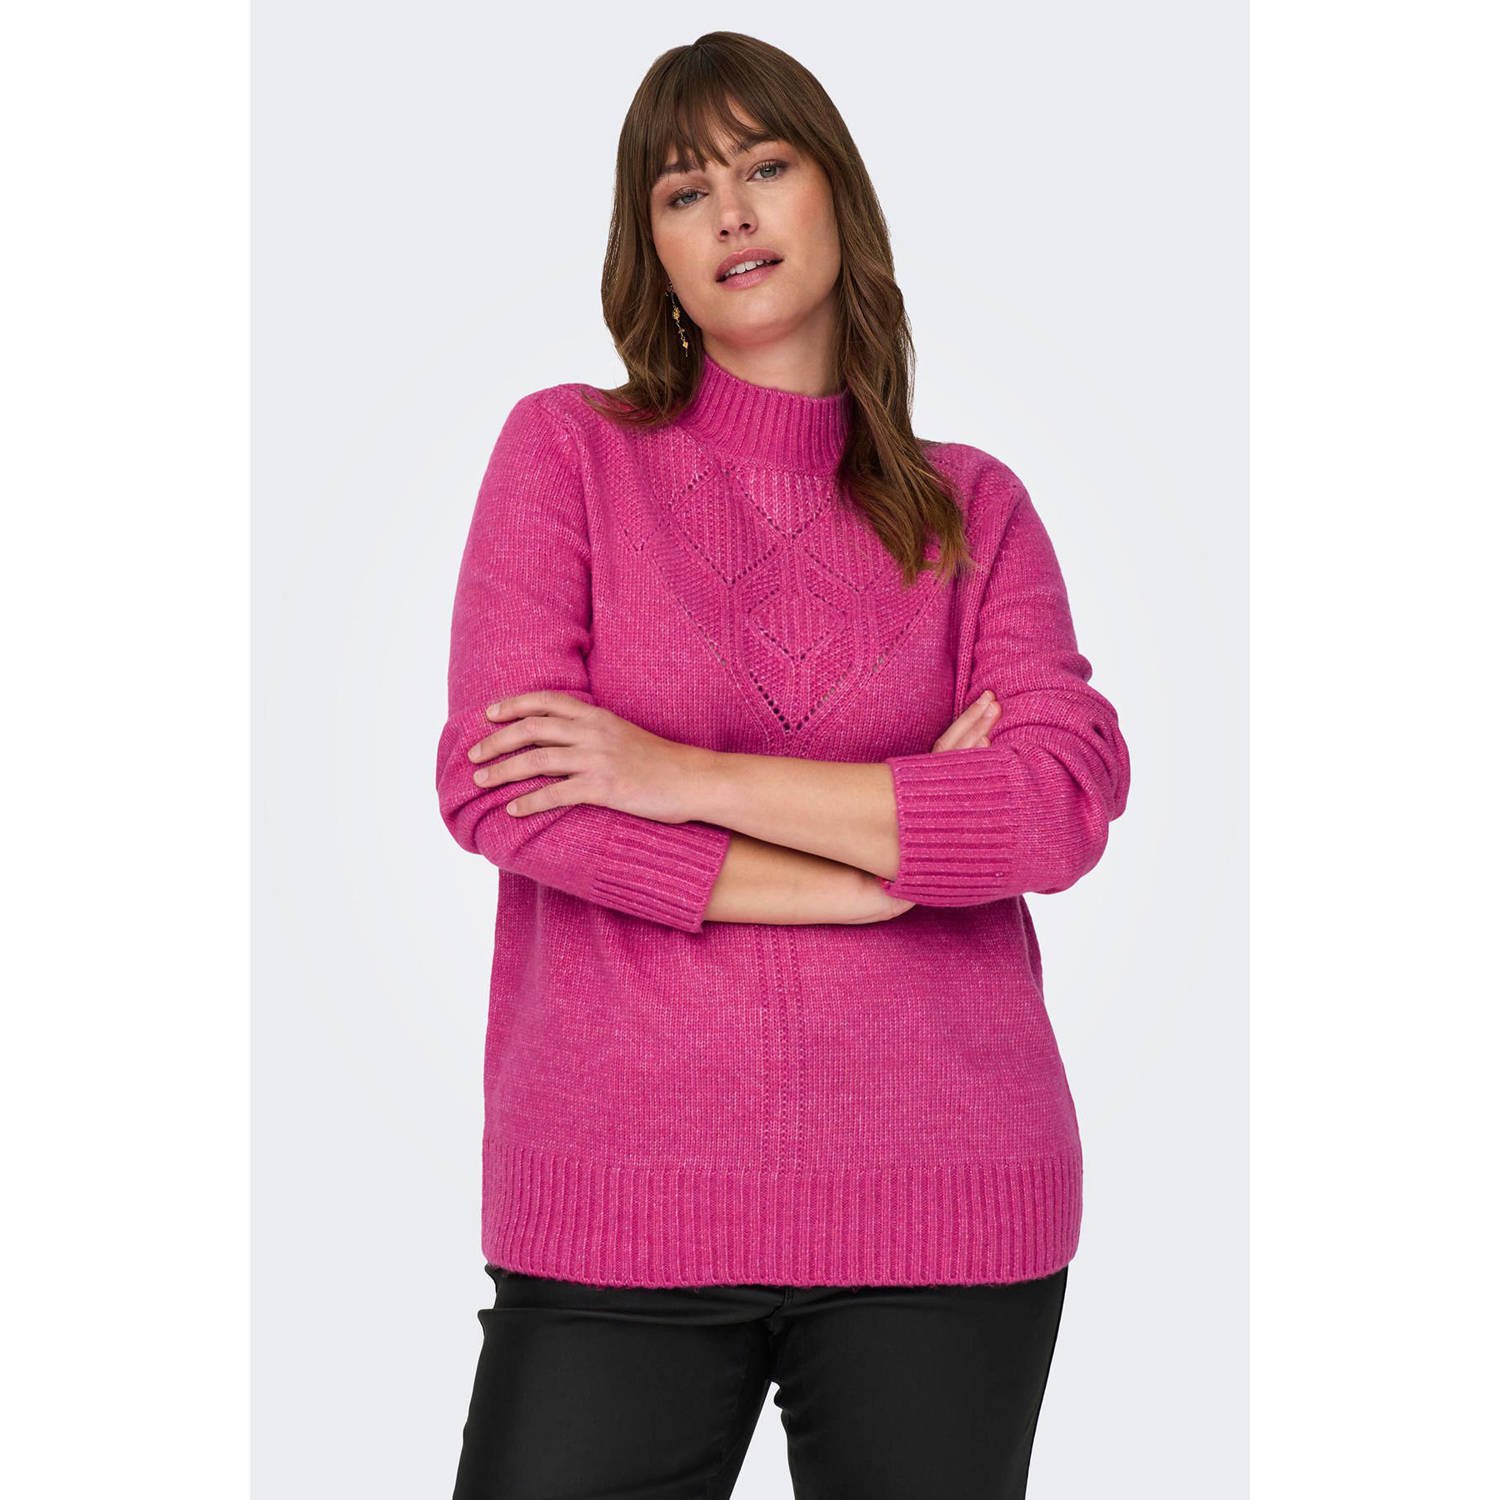 Only Carmakoma Carallie Life LS Highneck Coltrui Pink Dames